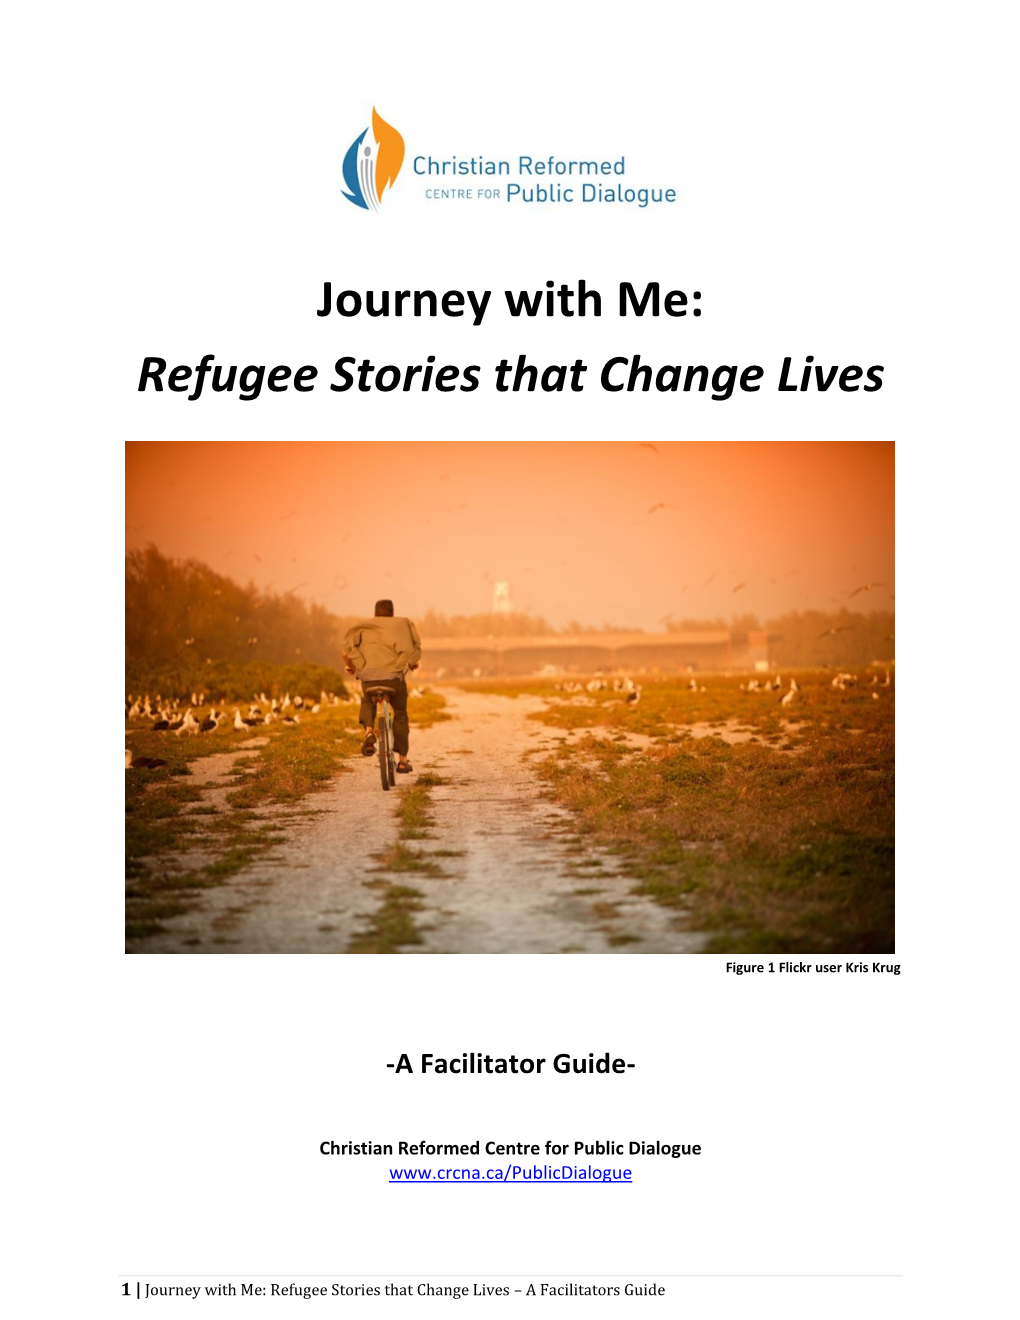 Journey with Me: Refugee Stories That Change Lives